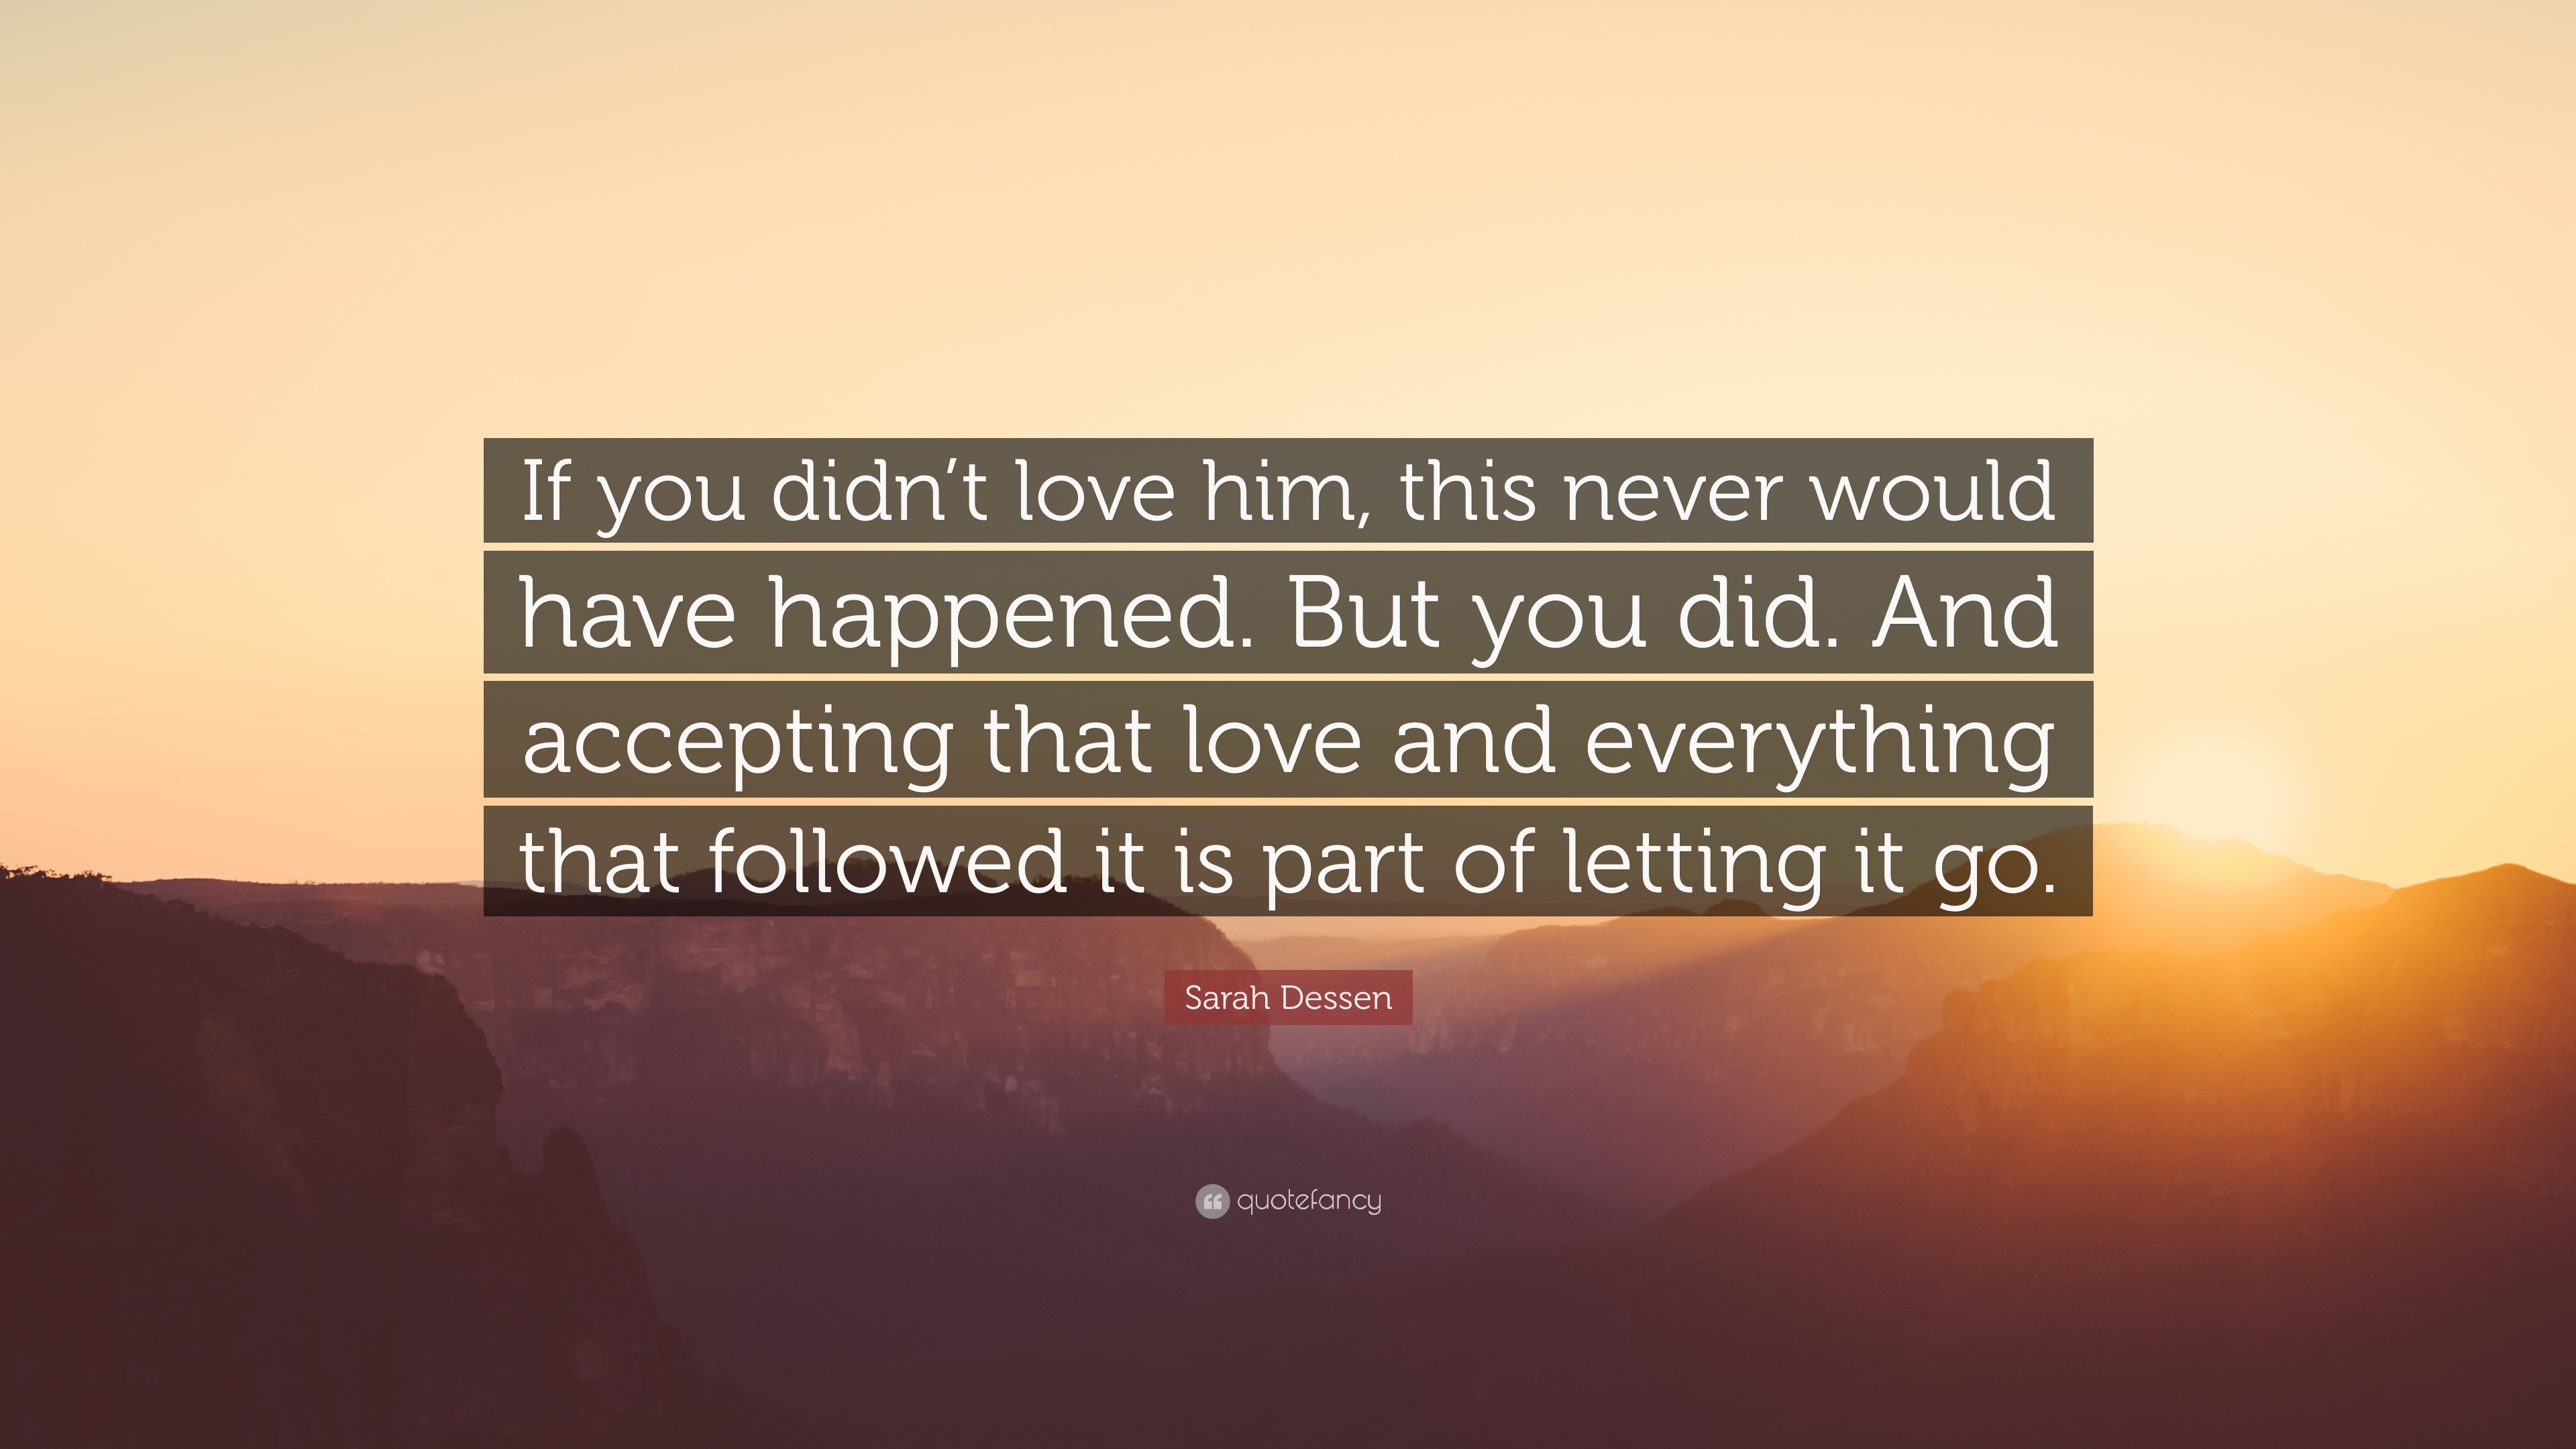 Sarah Dessen Quote If You Didn T Love Him This Never Would Have Happened But You Did And Accepting That Love And Everything That Followe